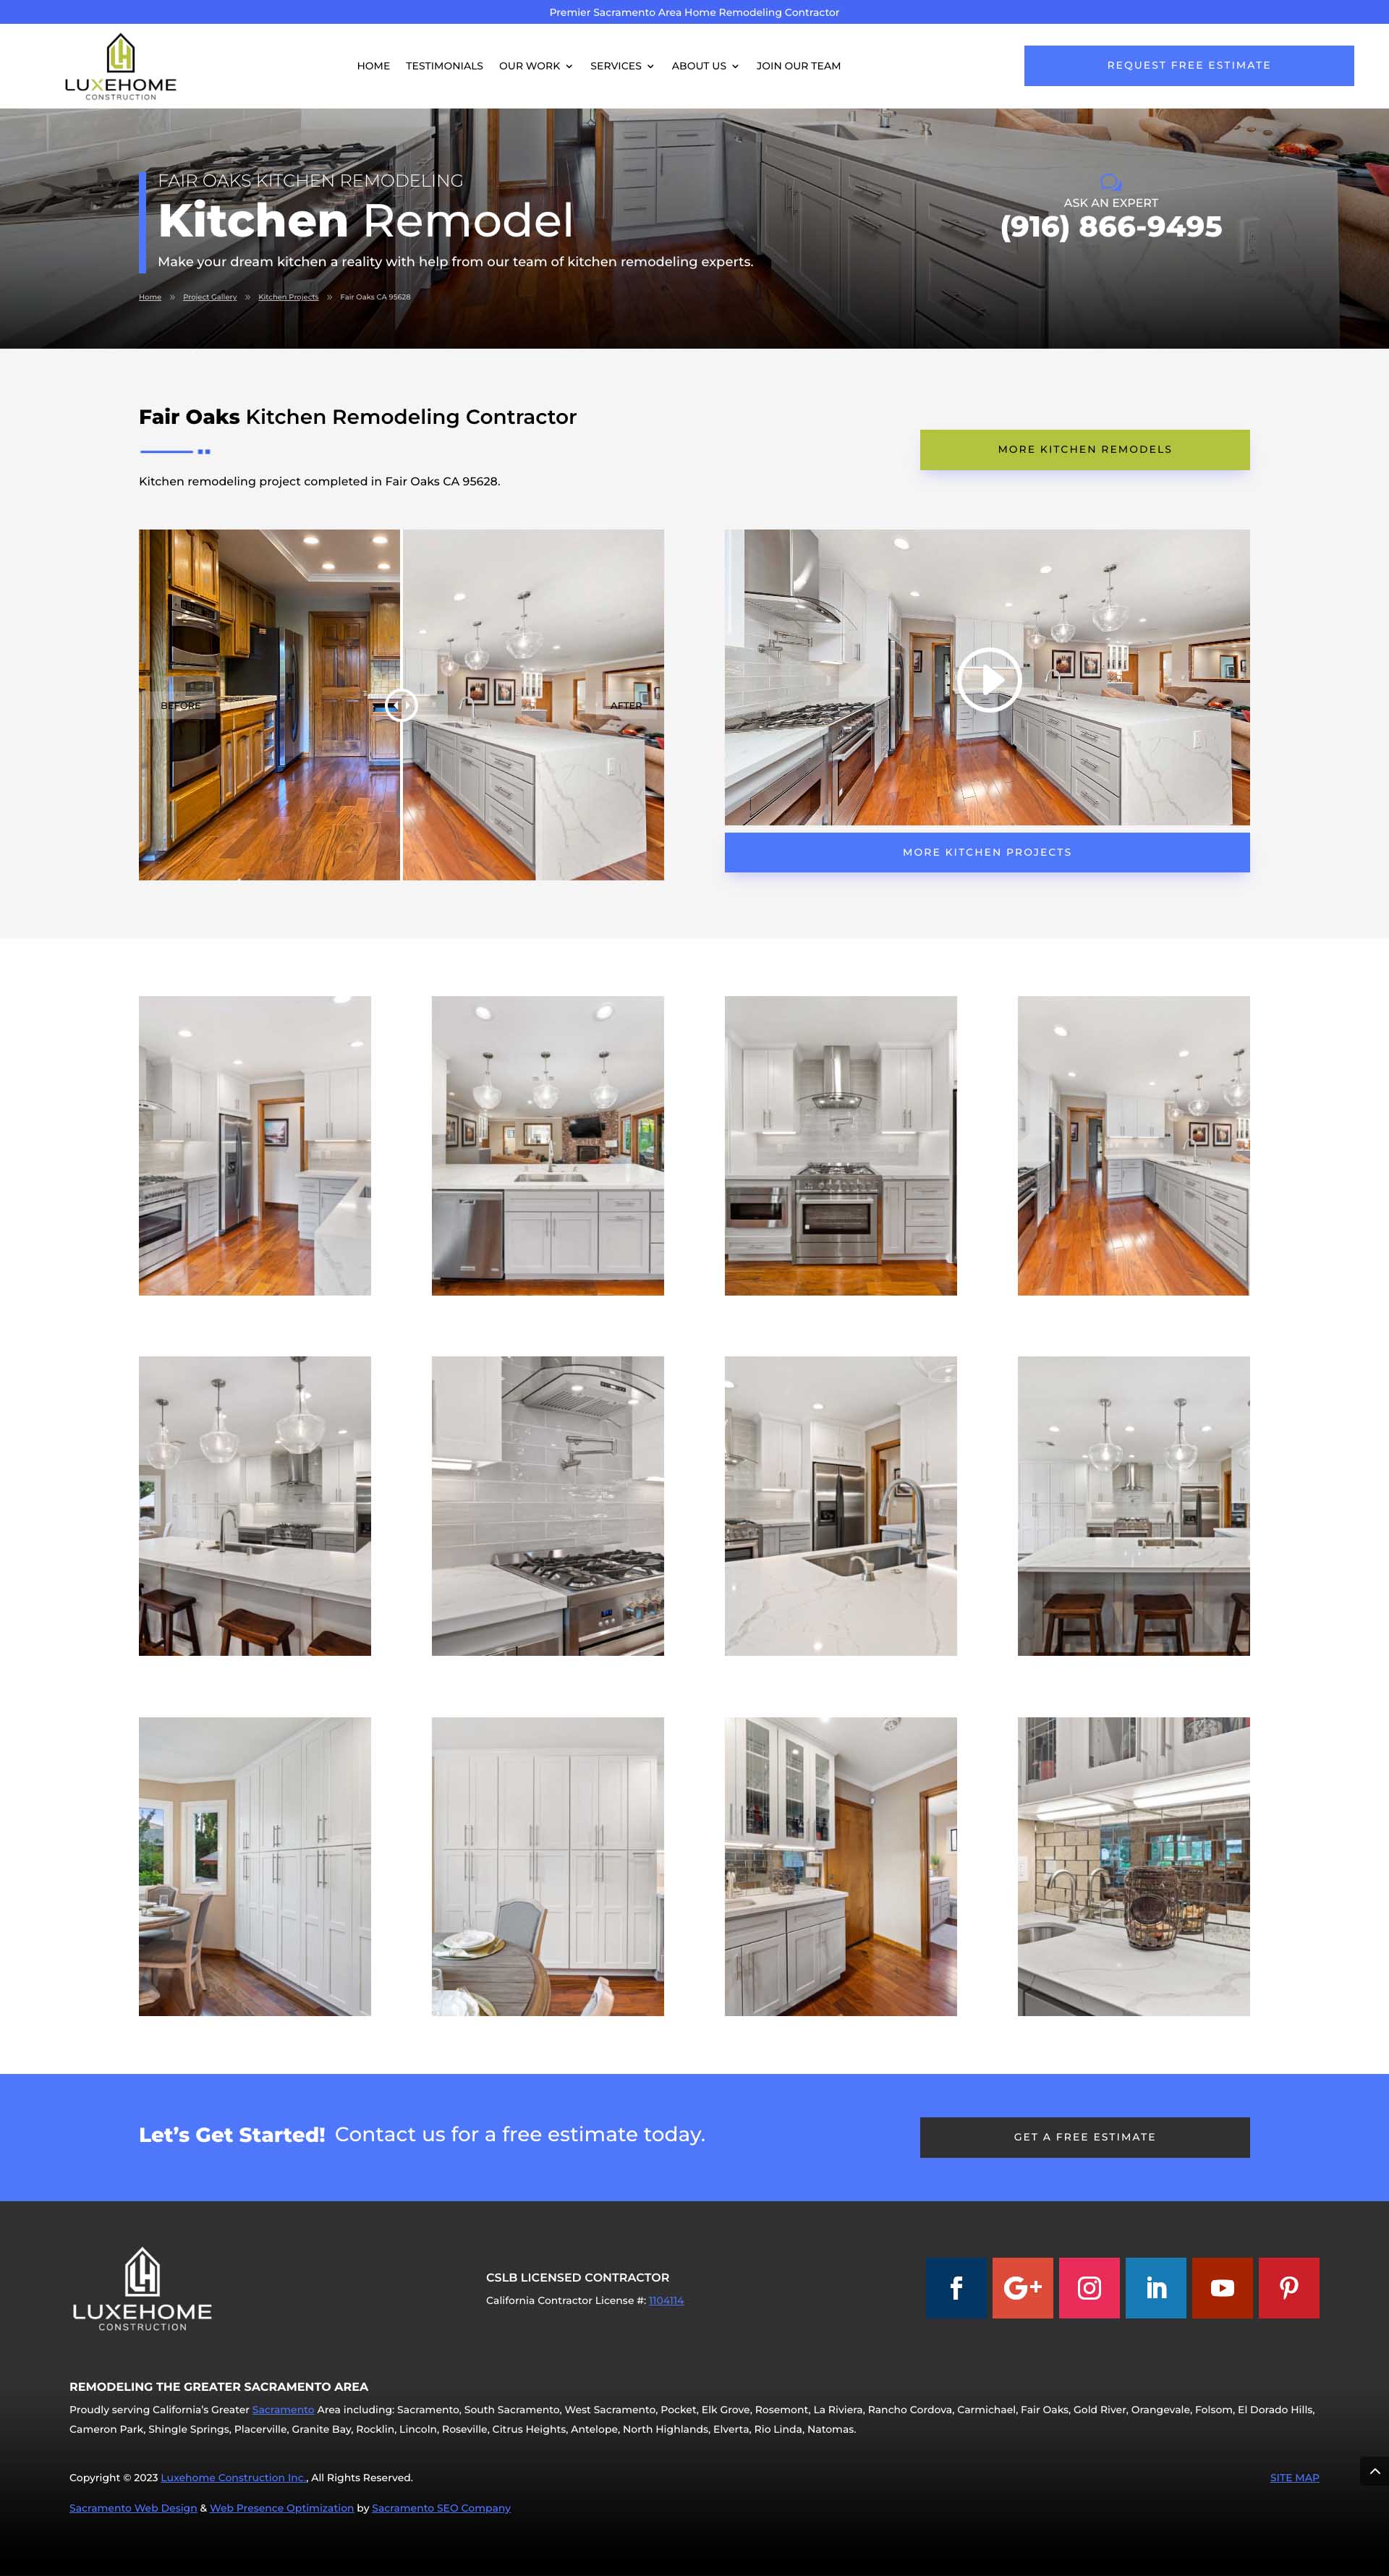 Luxehome Construction - Kitchen Remodel Project Page